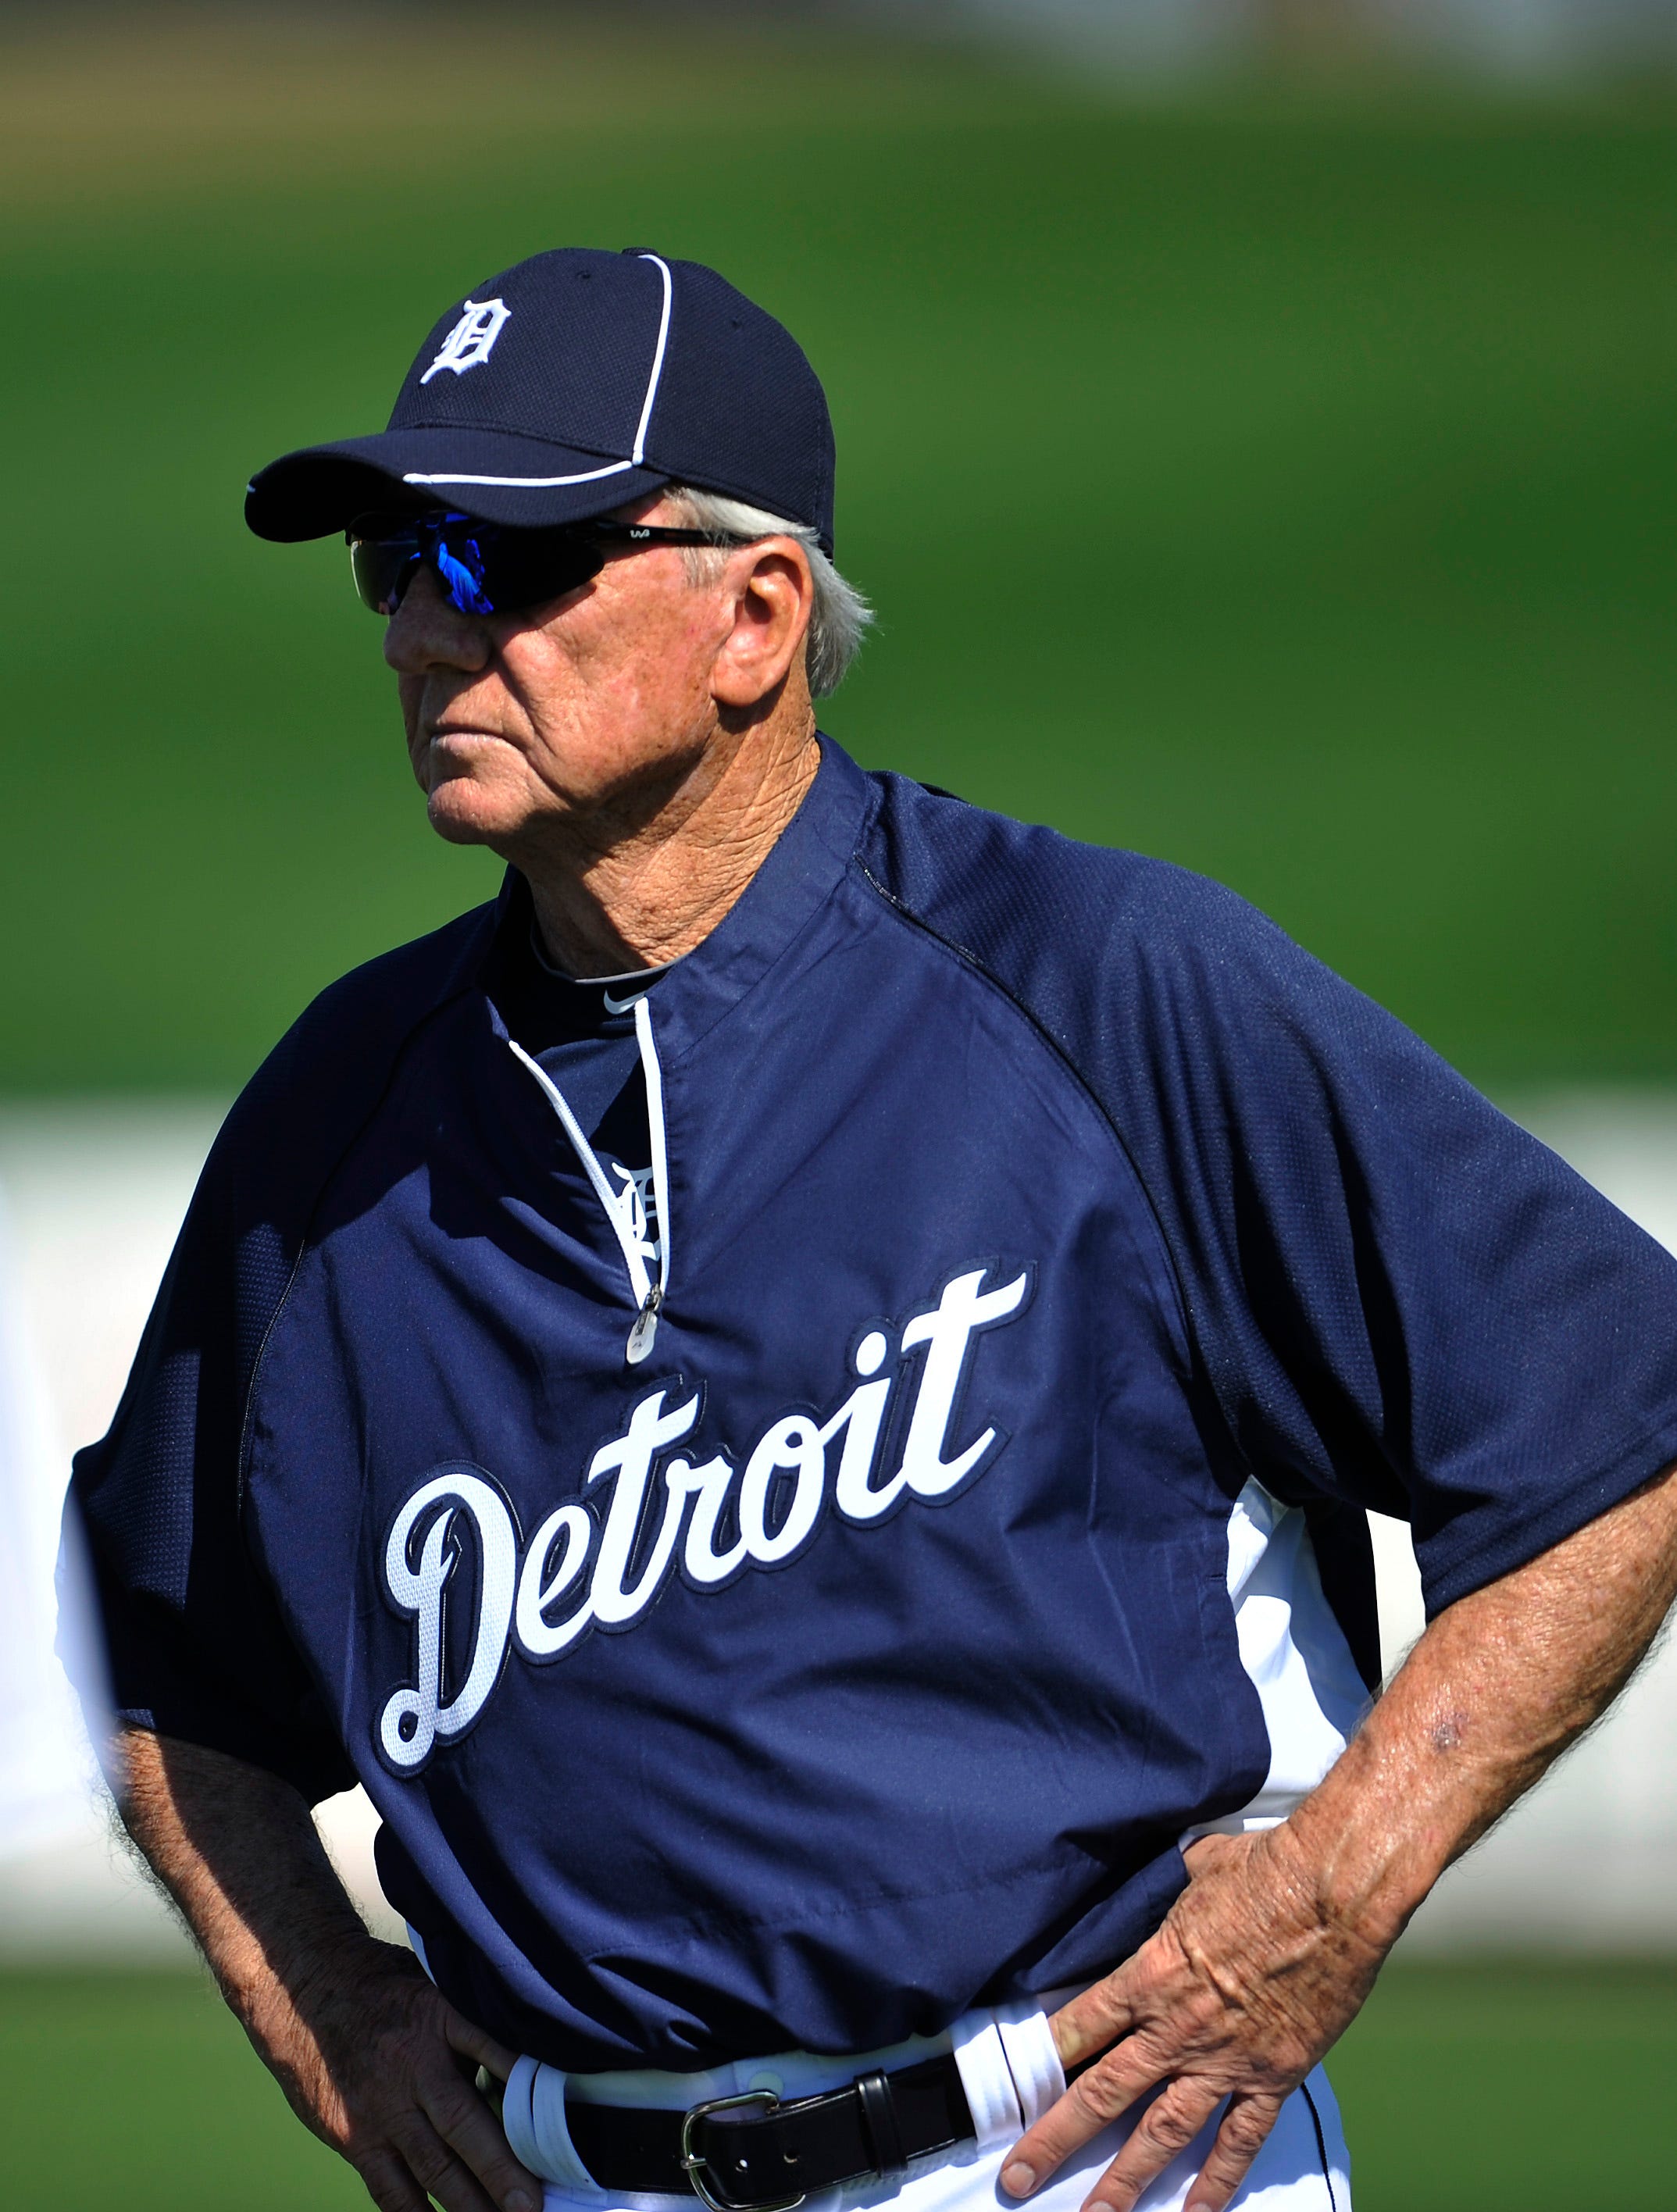 Former Tigers great Al Kaline, now a special assistant to president and GM Dave Dombrowski, watches the fly ball drills for the Tigers outfielders during Detroit Tigers spring training camp in Lakeland, Florida on Saturday, February 19, 2011.